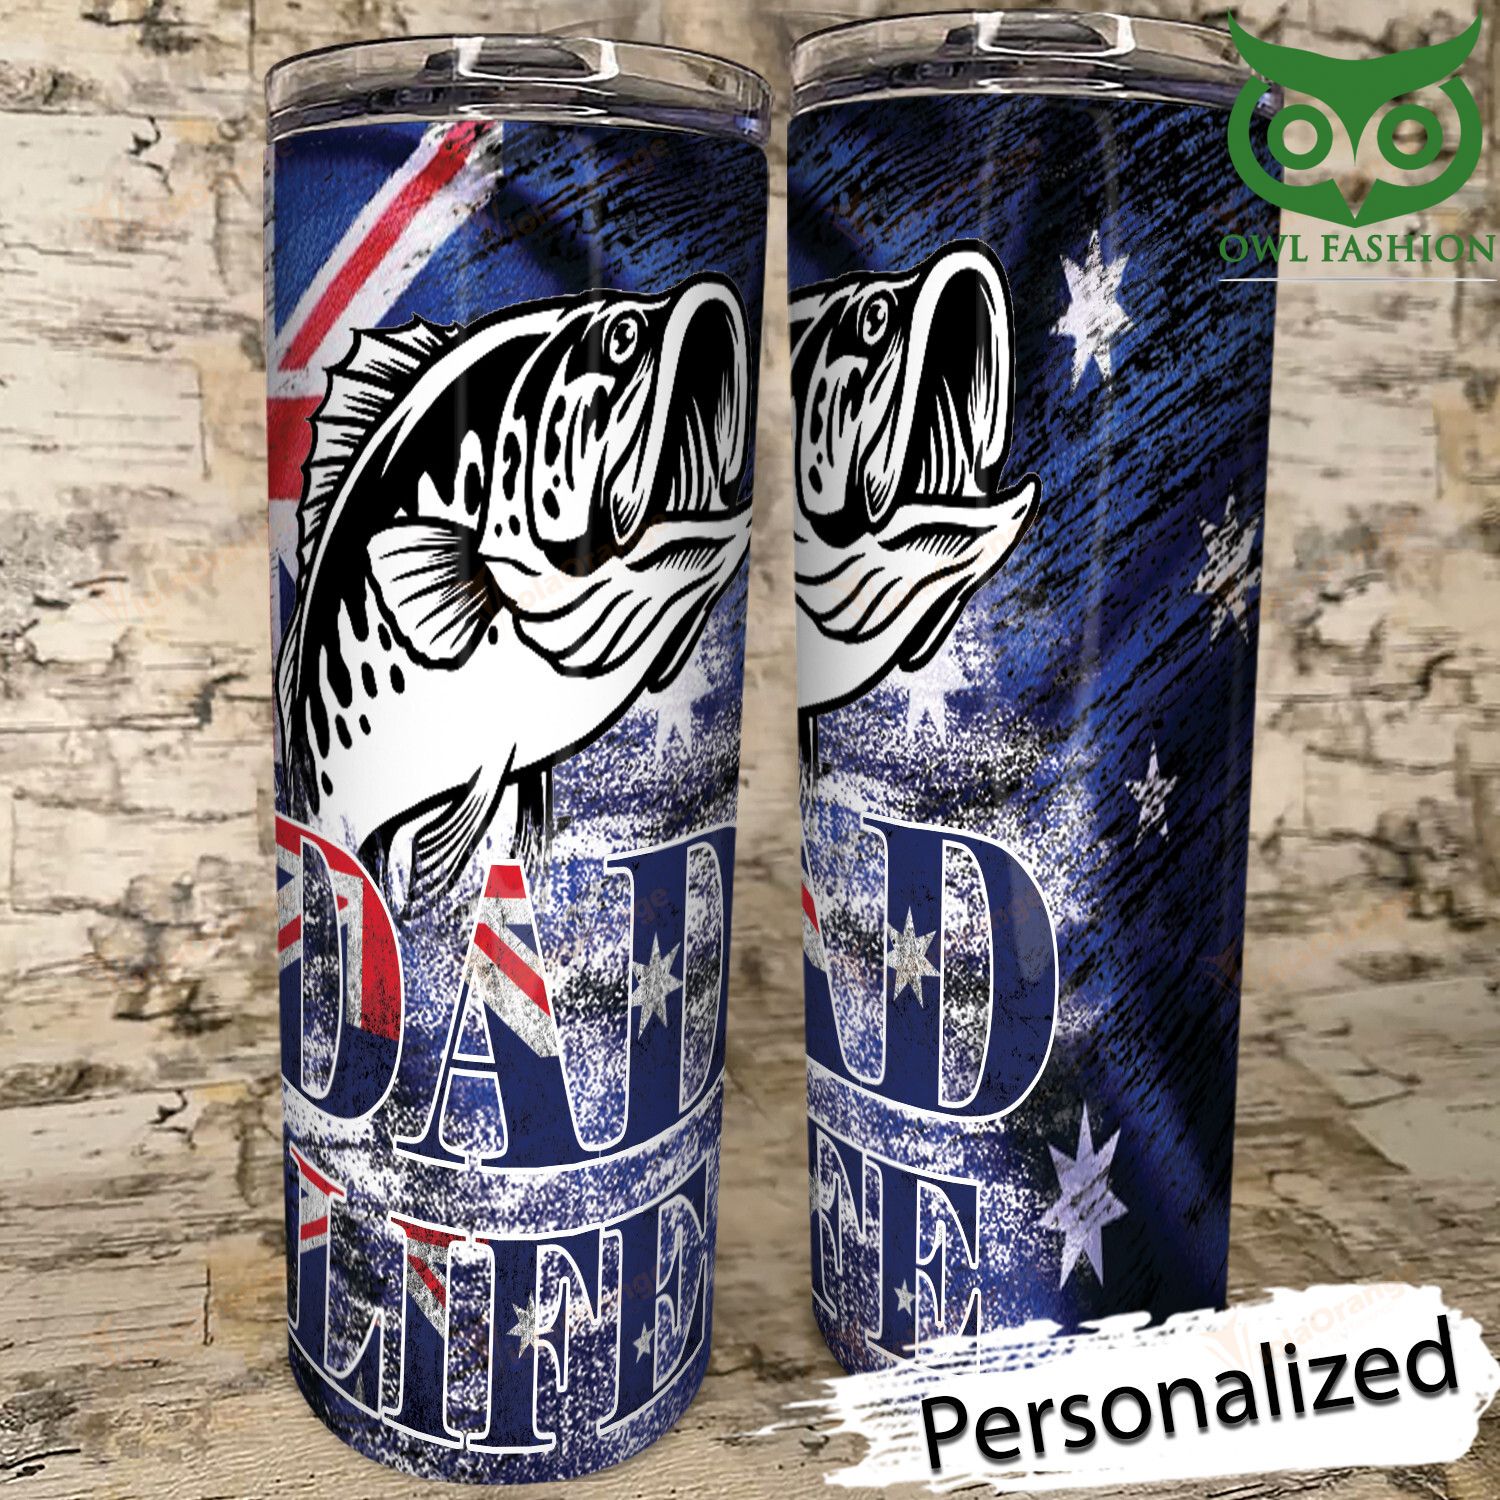 52 Special design Personalized Aus Fishing skinny tumbler cup